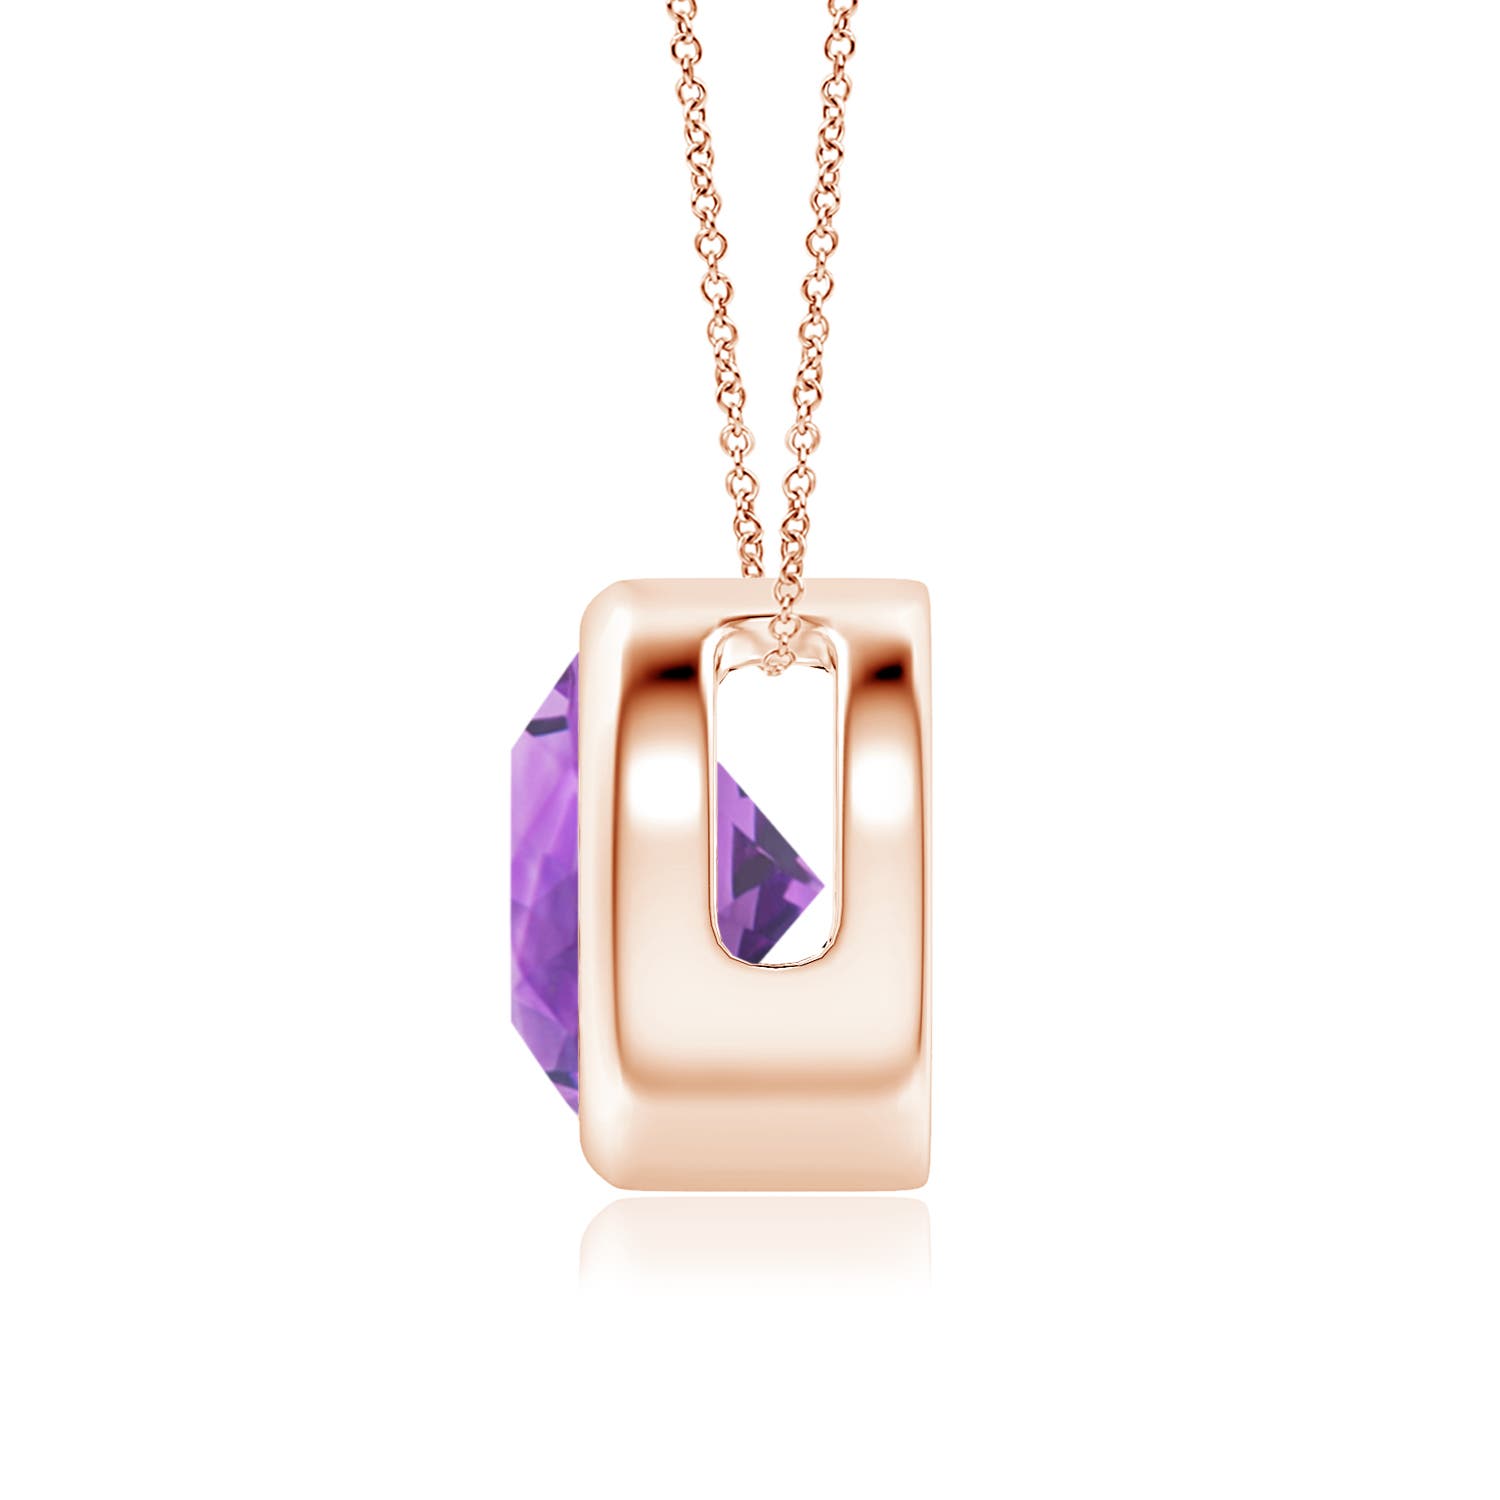 AA - Amethyst / 1.7 CT / 14 KT Rose Gold